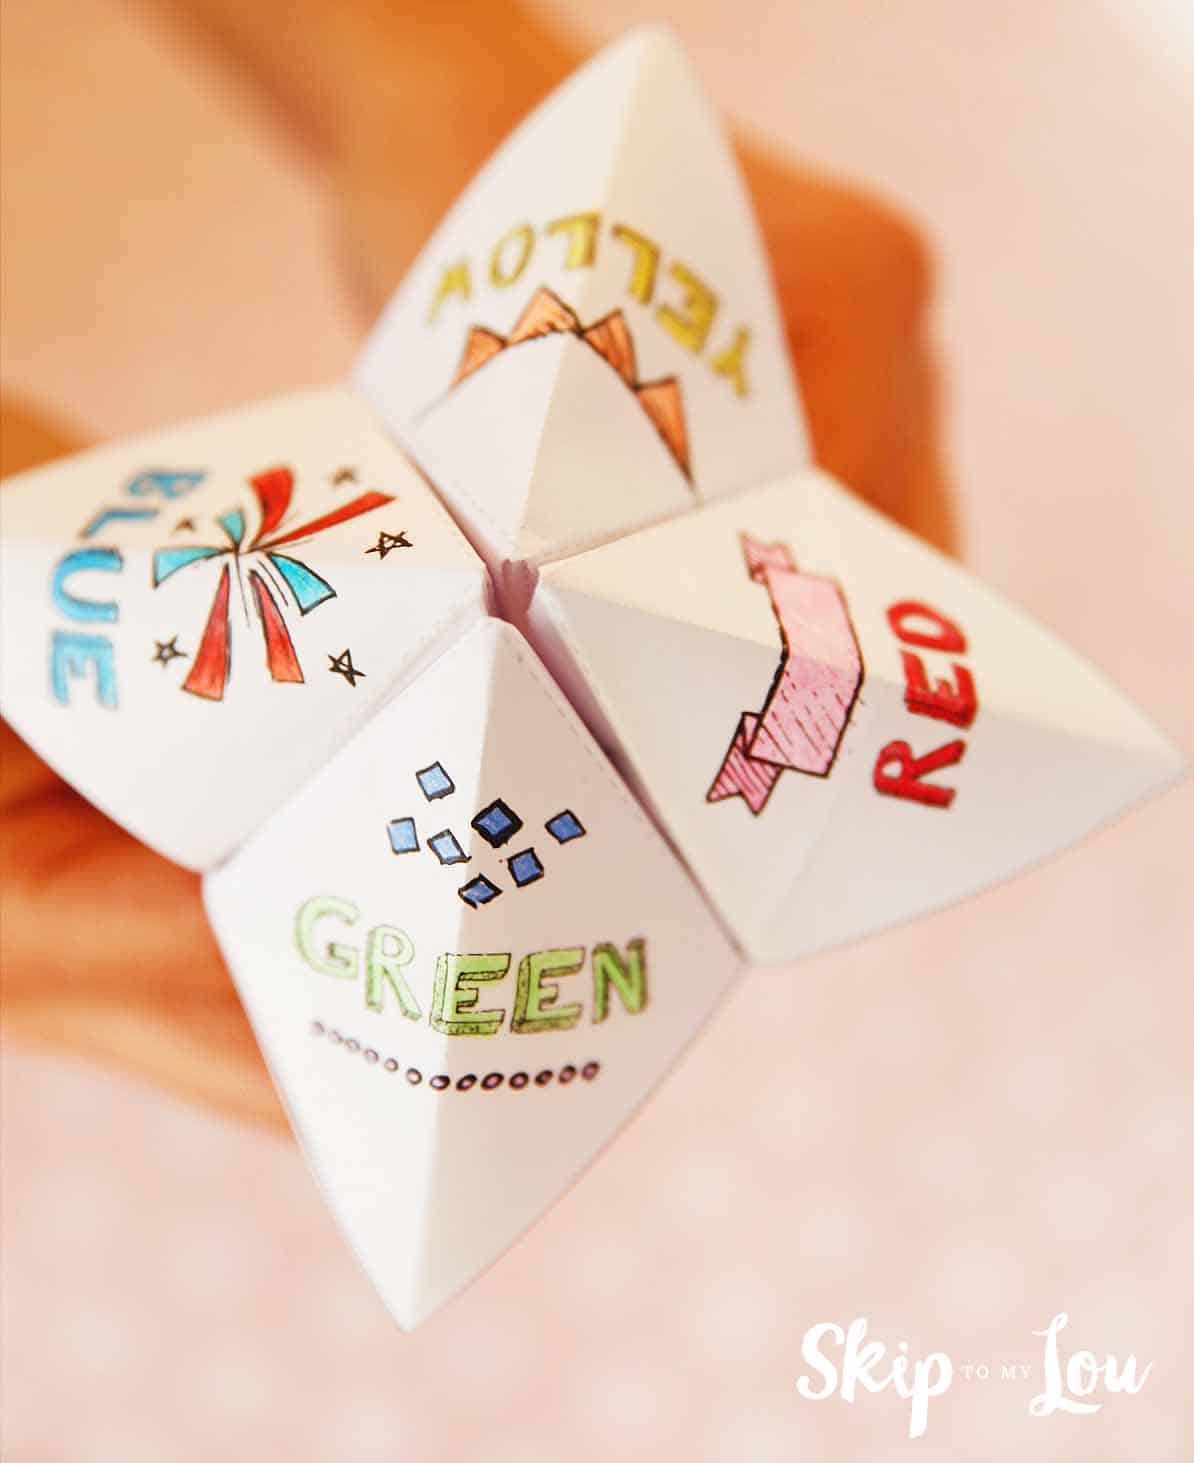 Fortune Teller Origami Sayings How To Make A Fortune Teller Skip To My Lou